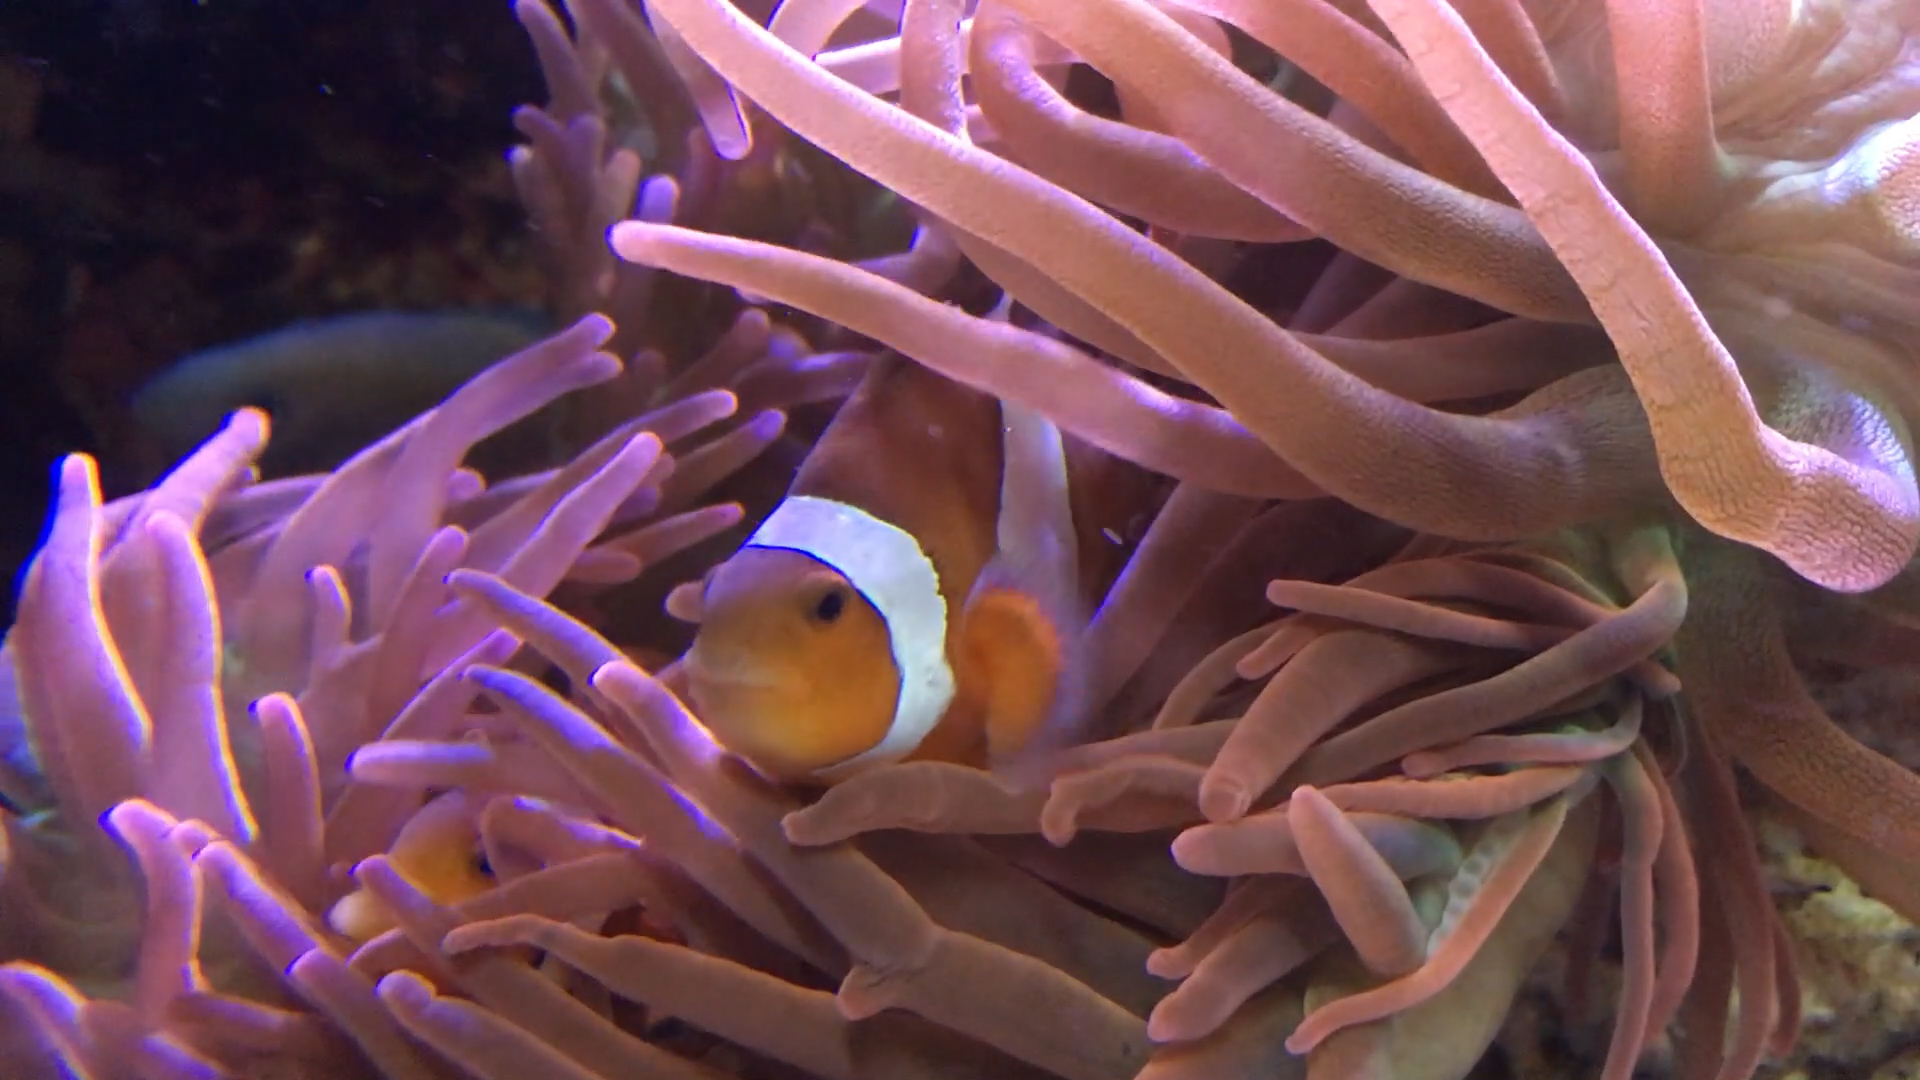 A clownfish peers out from an anemone in a fish tank at Georgia Aquarium. Anemones usually sting, kill and eat fish, but not clownfish. Georgia Tech researchers found that the microbial colonies in the slime covering clownfish shifted markedly when the nested in an anemone. Could the microbes be putting out chemical messengers that pacify the fish killer? Credit: Georgia Tech / Ben Brumfield